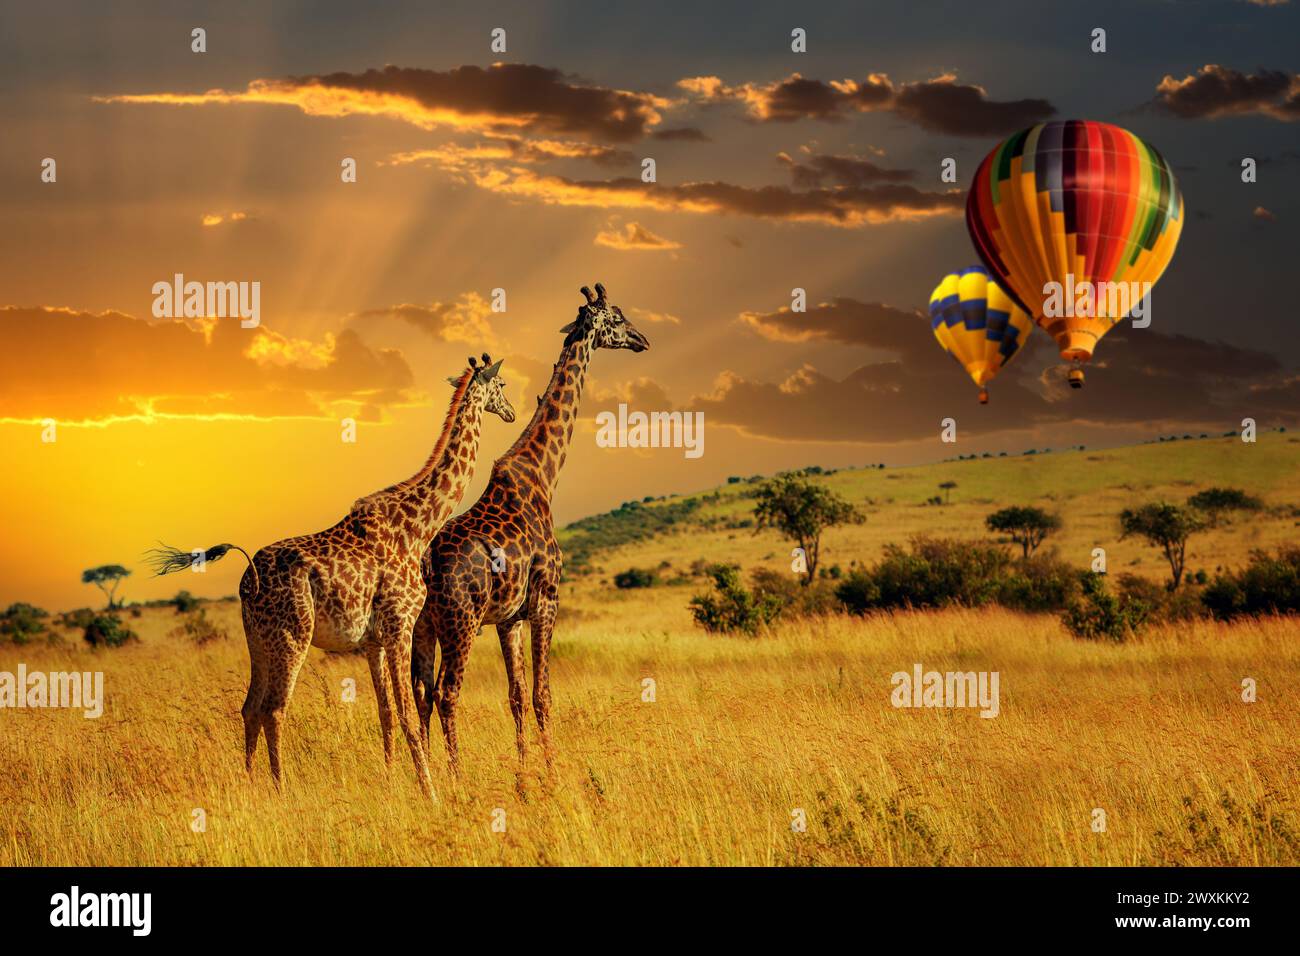 Two giraffes are standing tall on top of a dry grass field with air ballon, their long necks reaching high as they survey the landscape Stock Photo